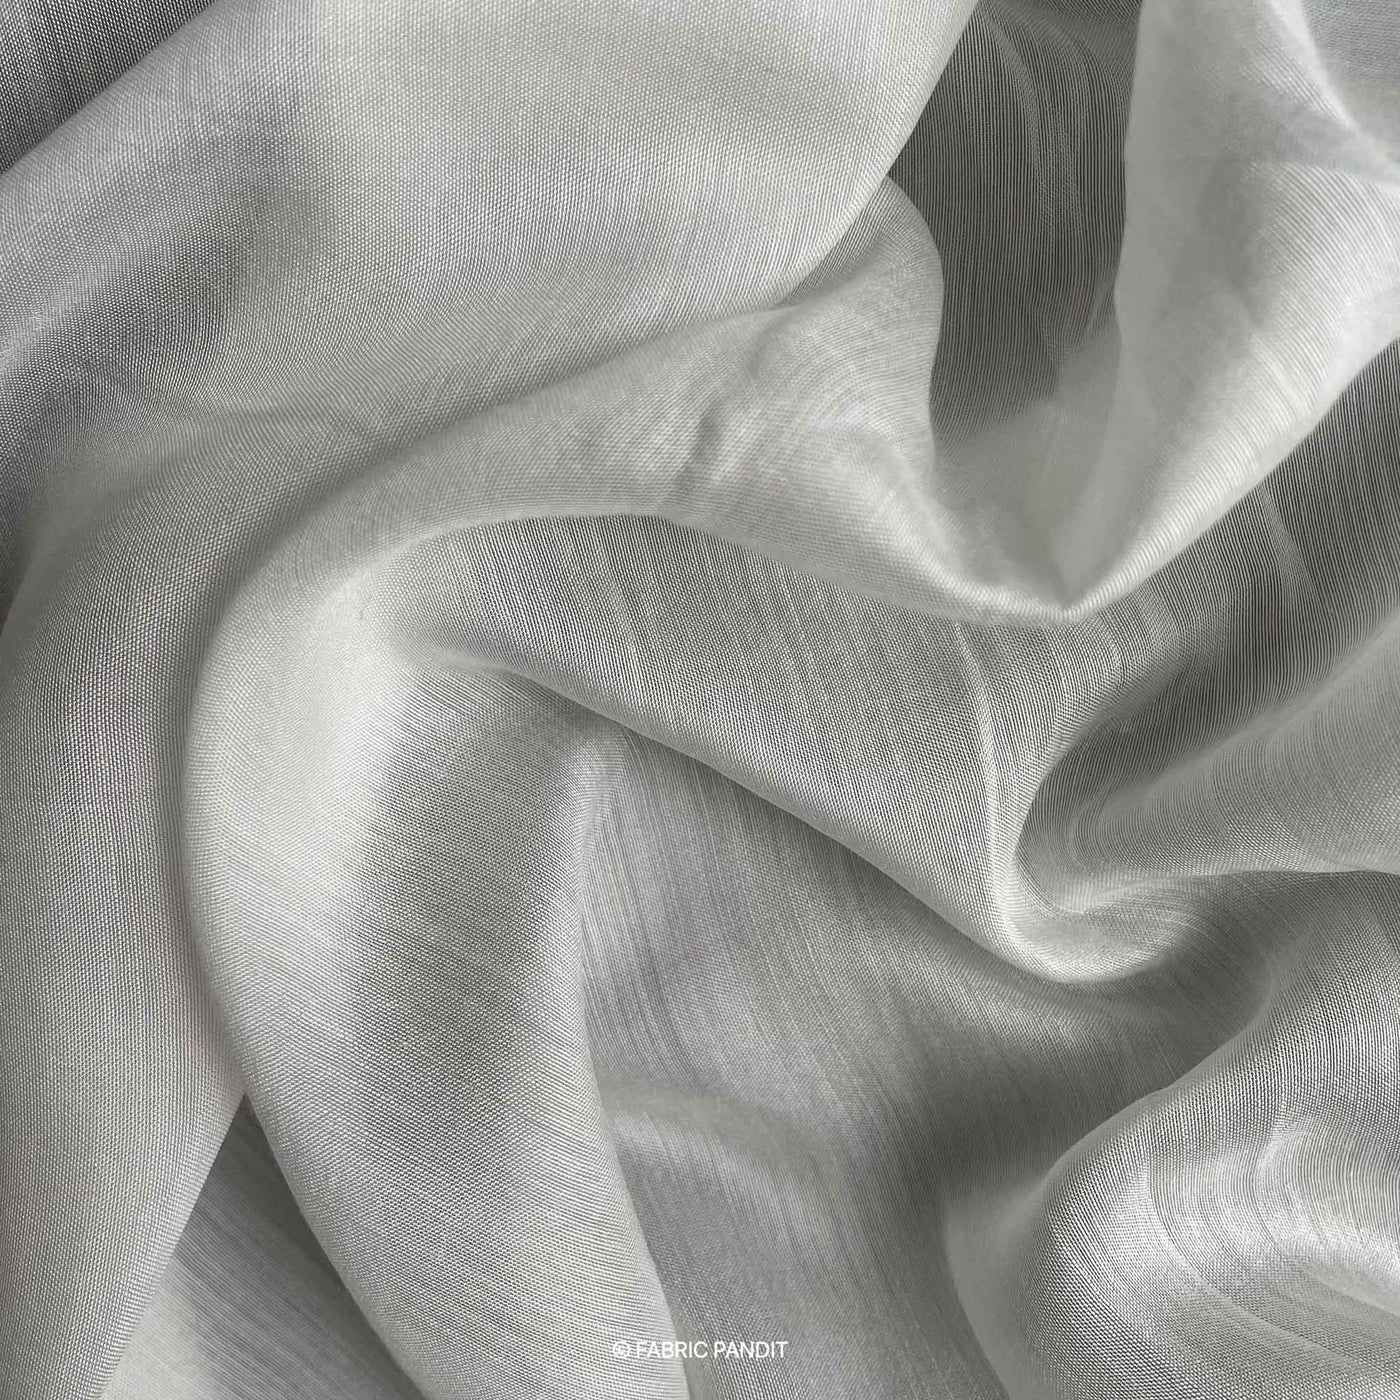 Dyeable Fabric Cut Piece (CUT PIECE) White Pure Bemberg Mul Silk Plain Fabric (Width 44 inches)